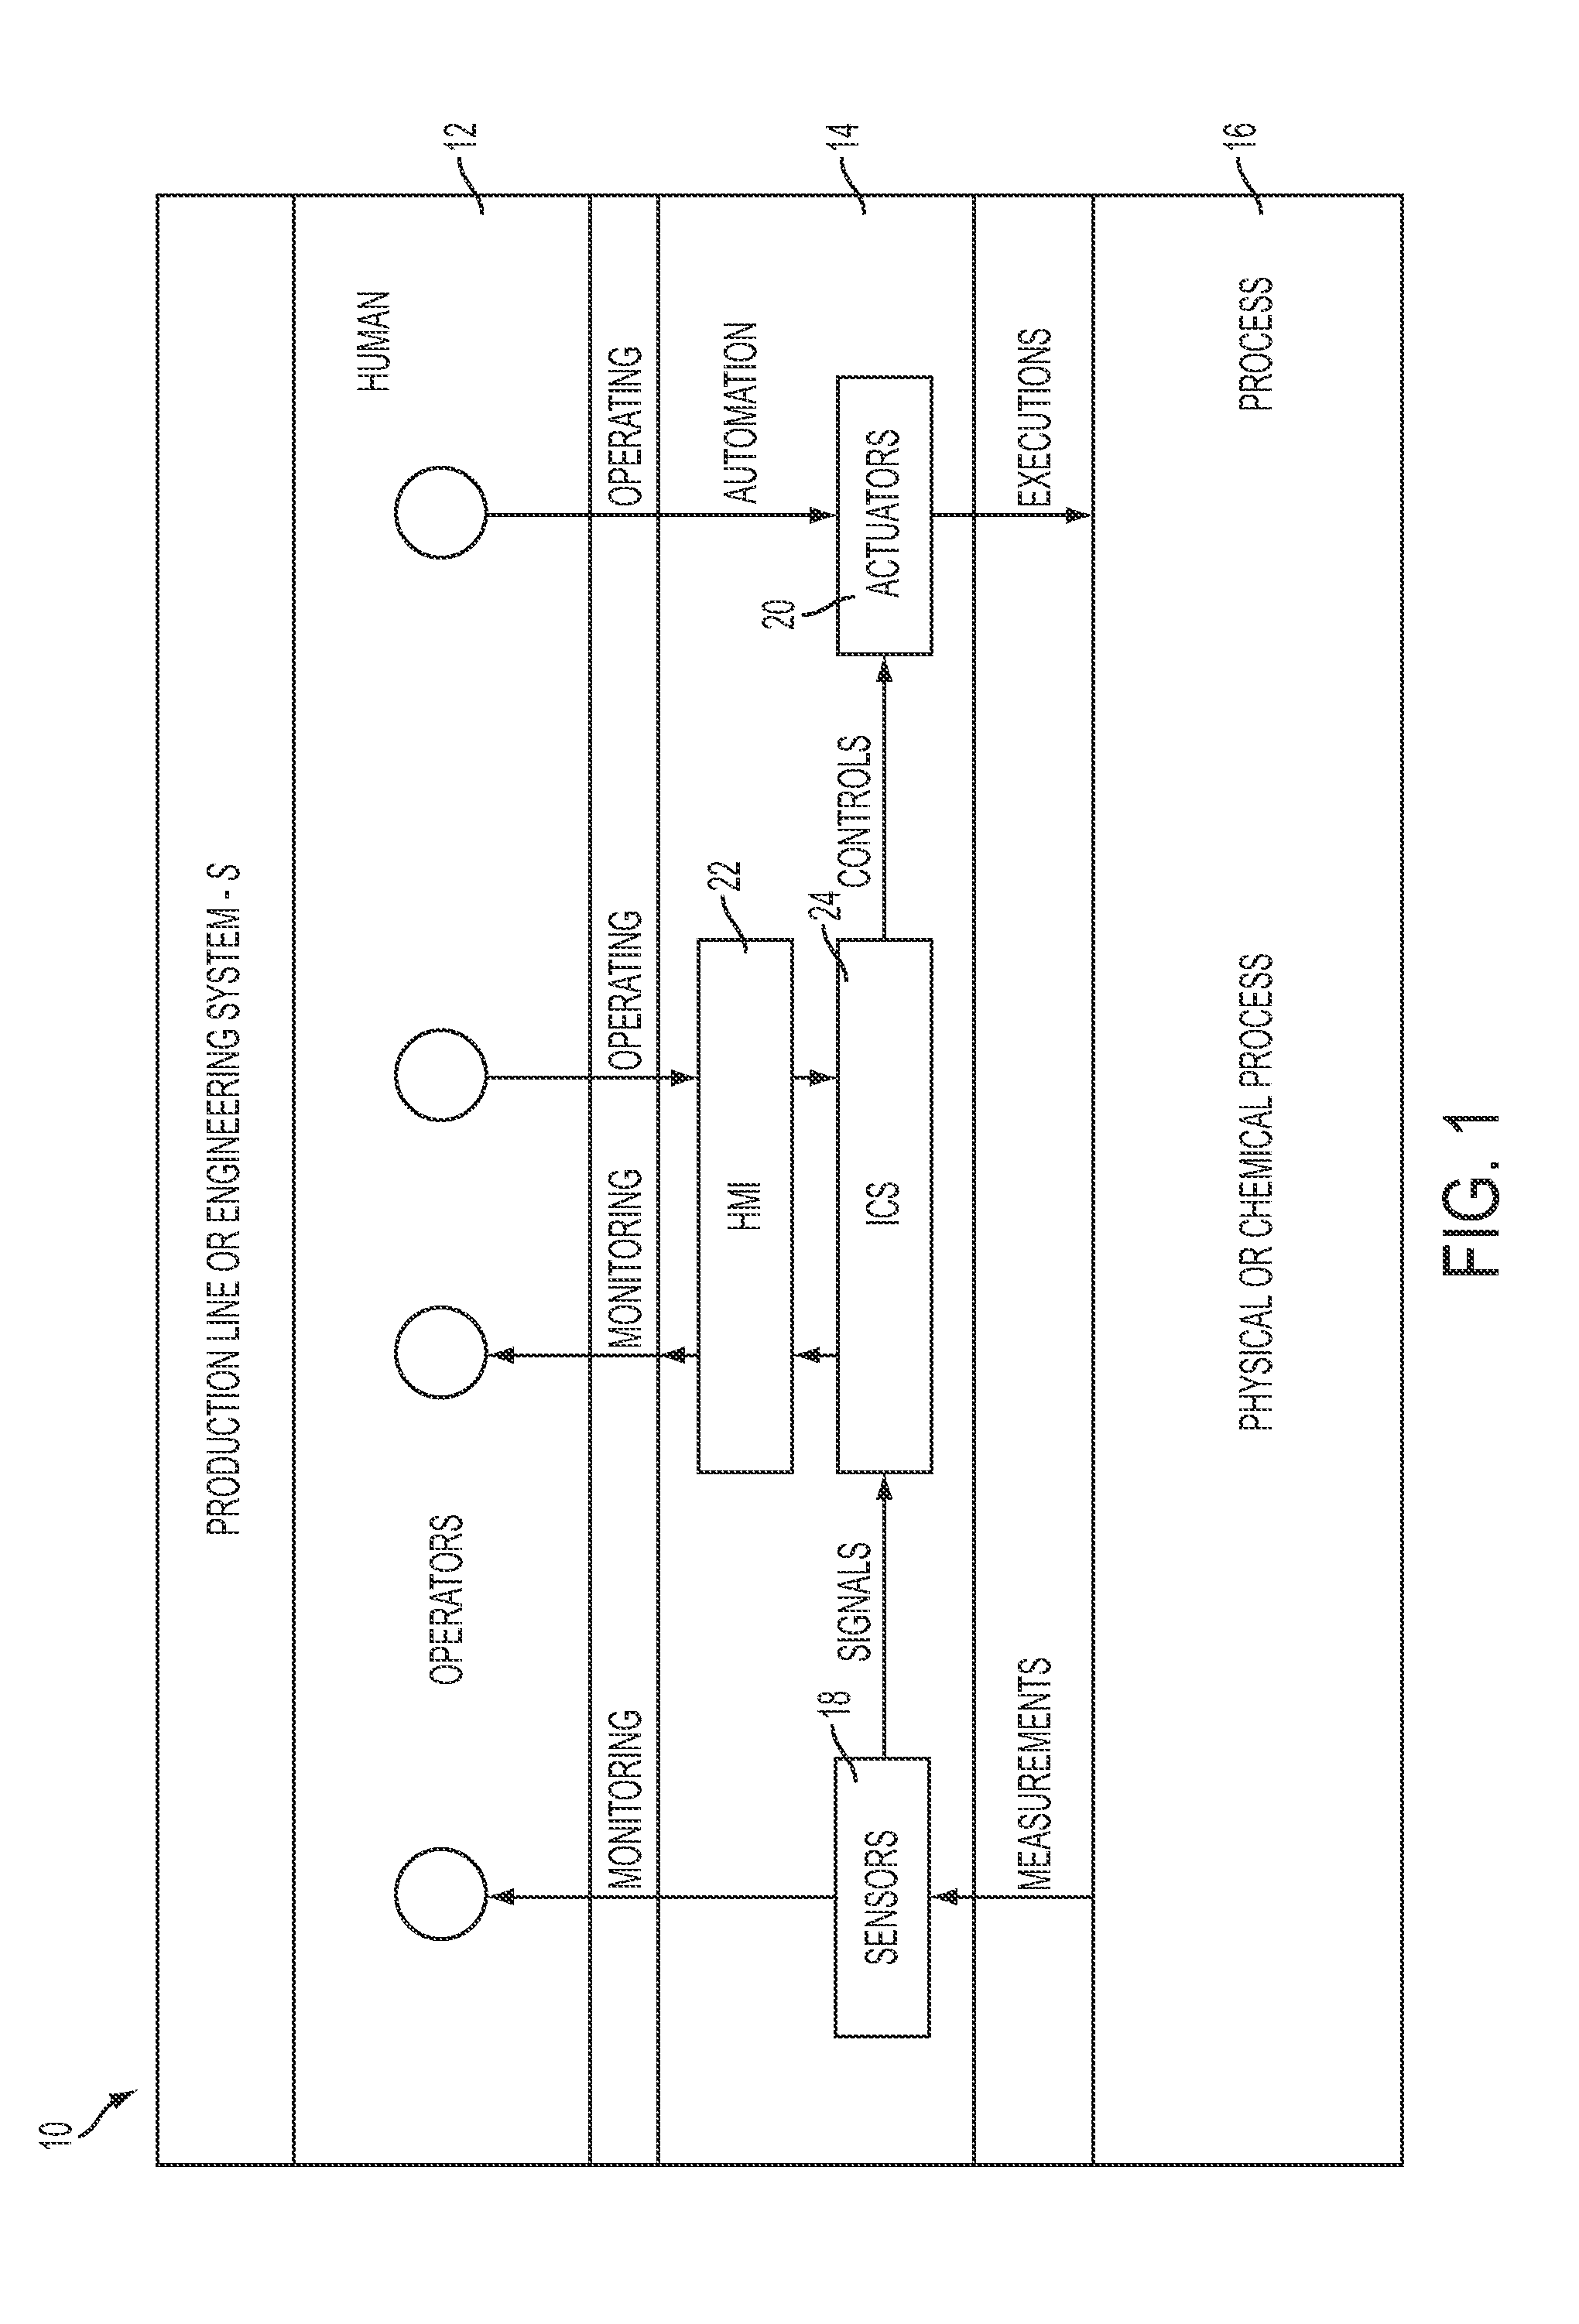 Method for quantitative resilience estimation of industrial control systems